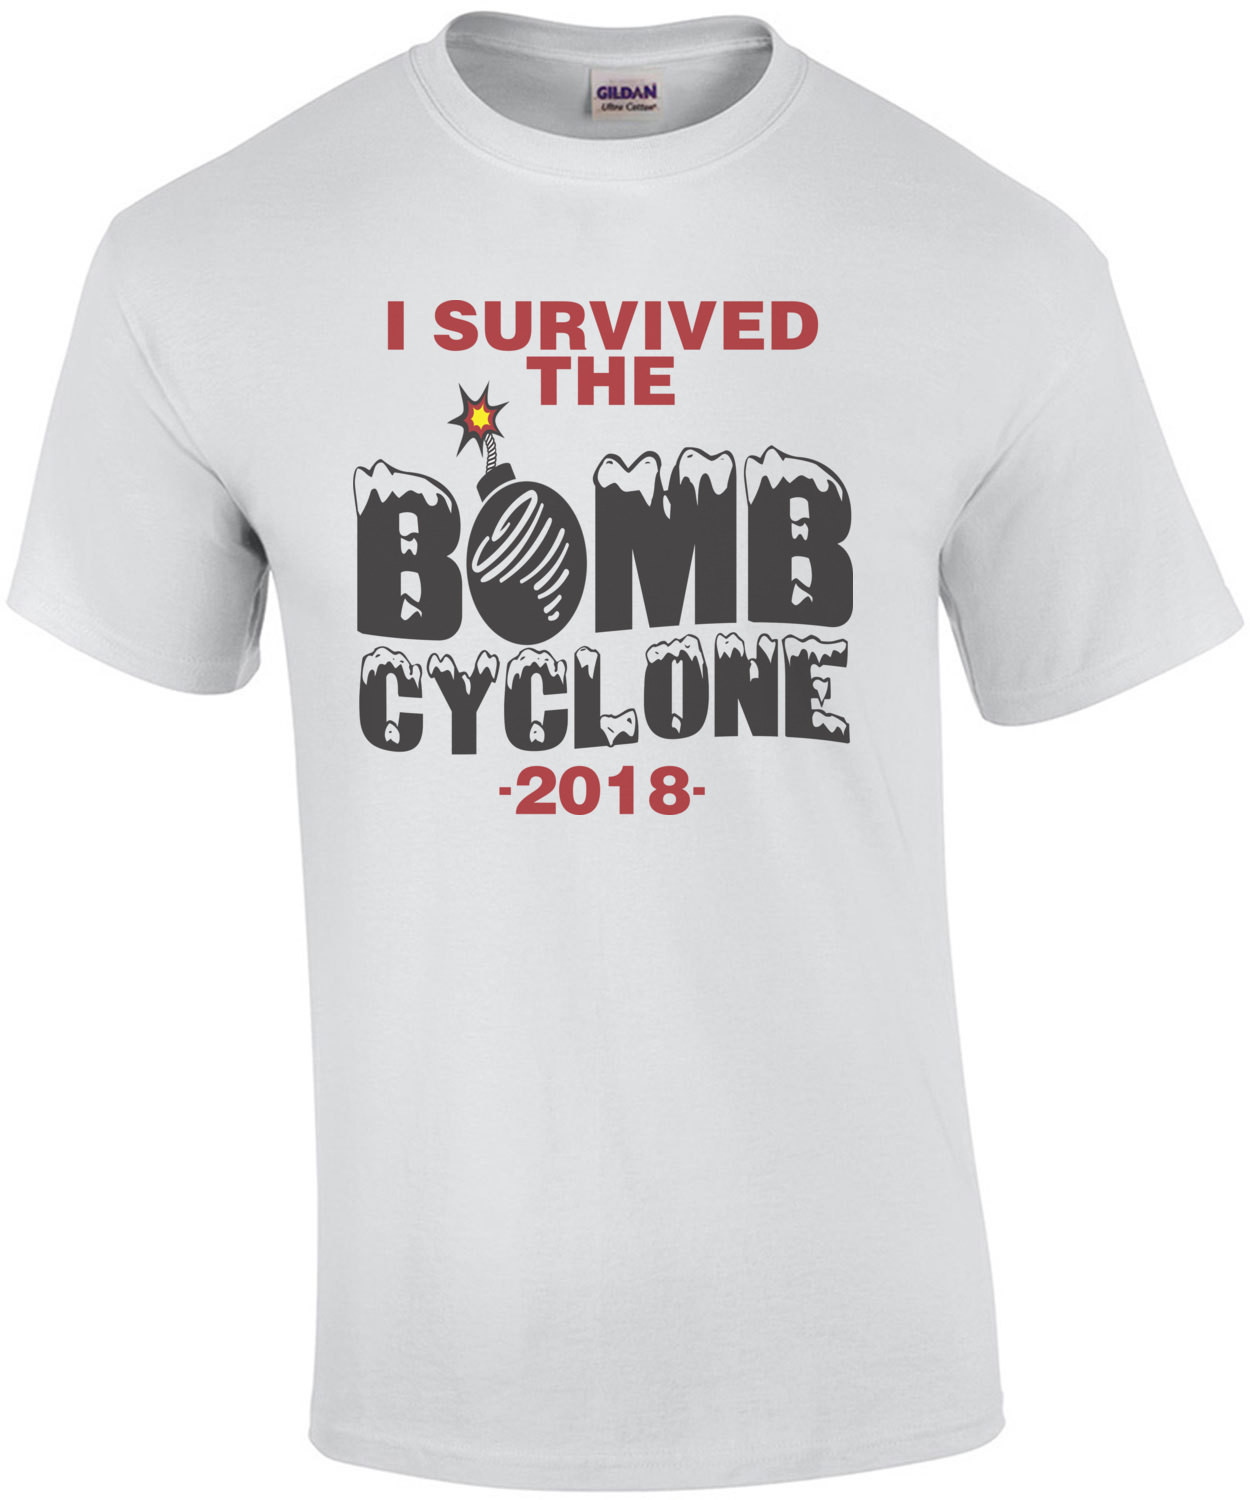 I Survived The Bomb Cyclone 2018 Funny Shirt